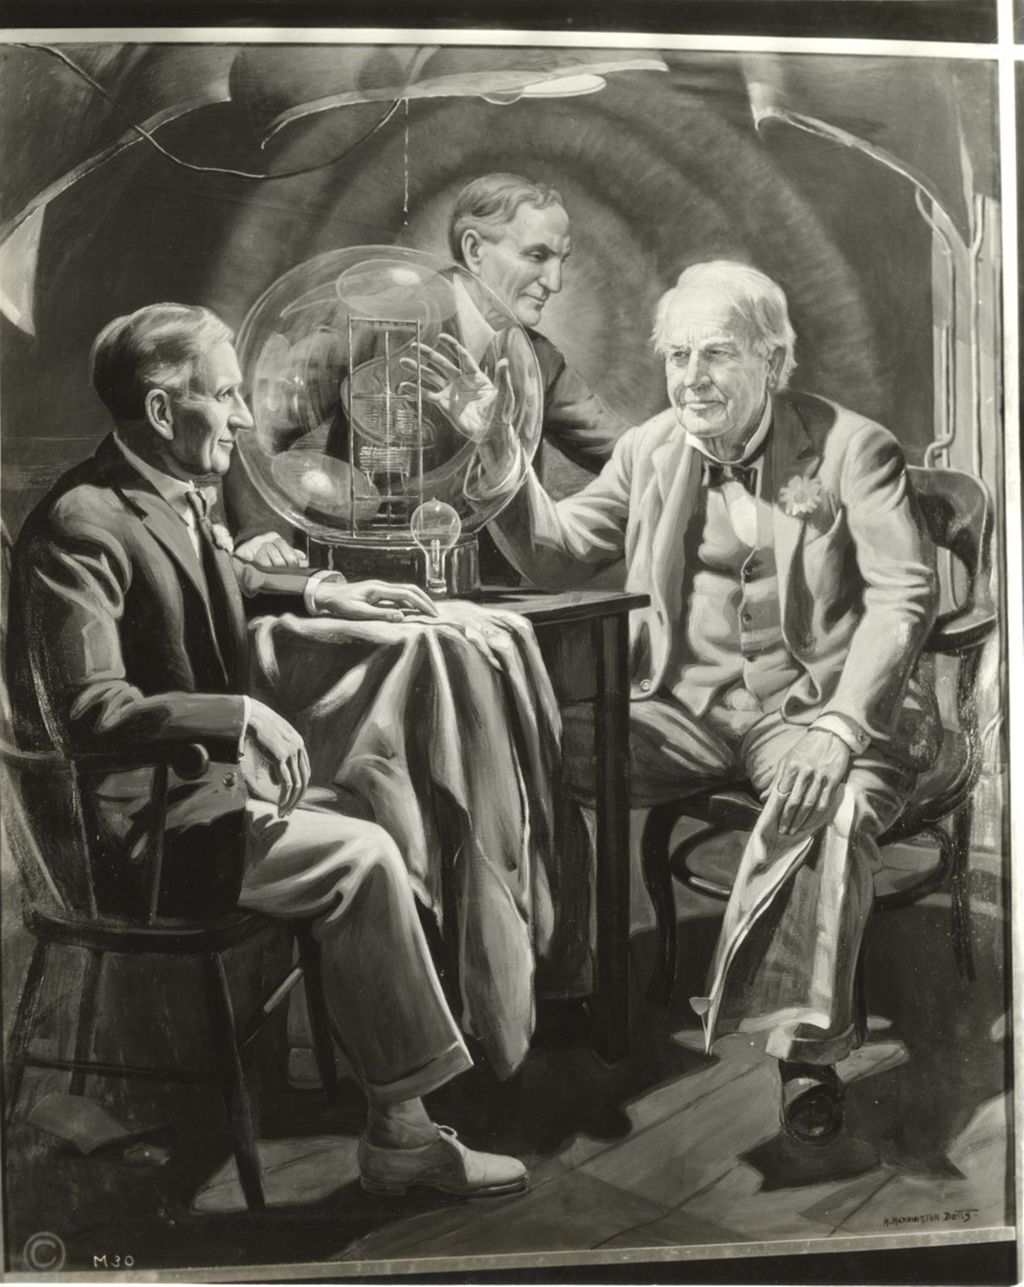 Miniature of Portrait of Edison, Ford, and Firestone done by H. Harrington Betts on display in Electric Light and Power Industry's exhibit